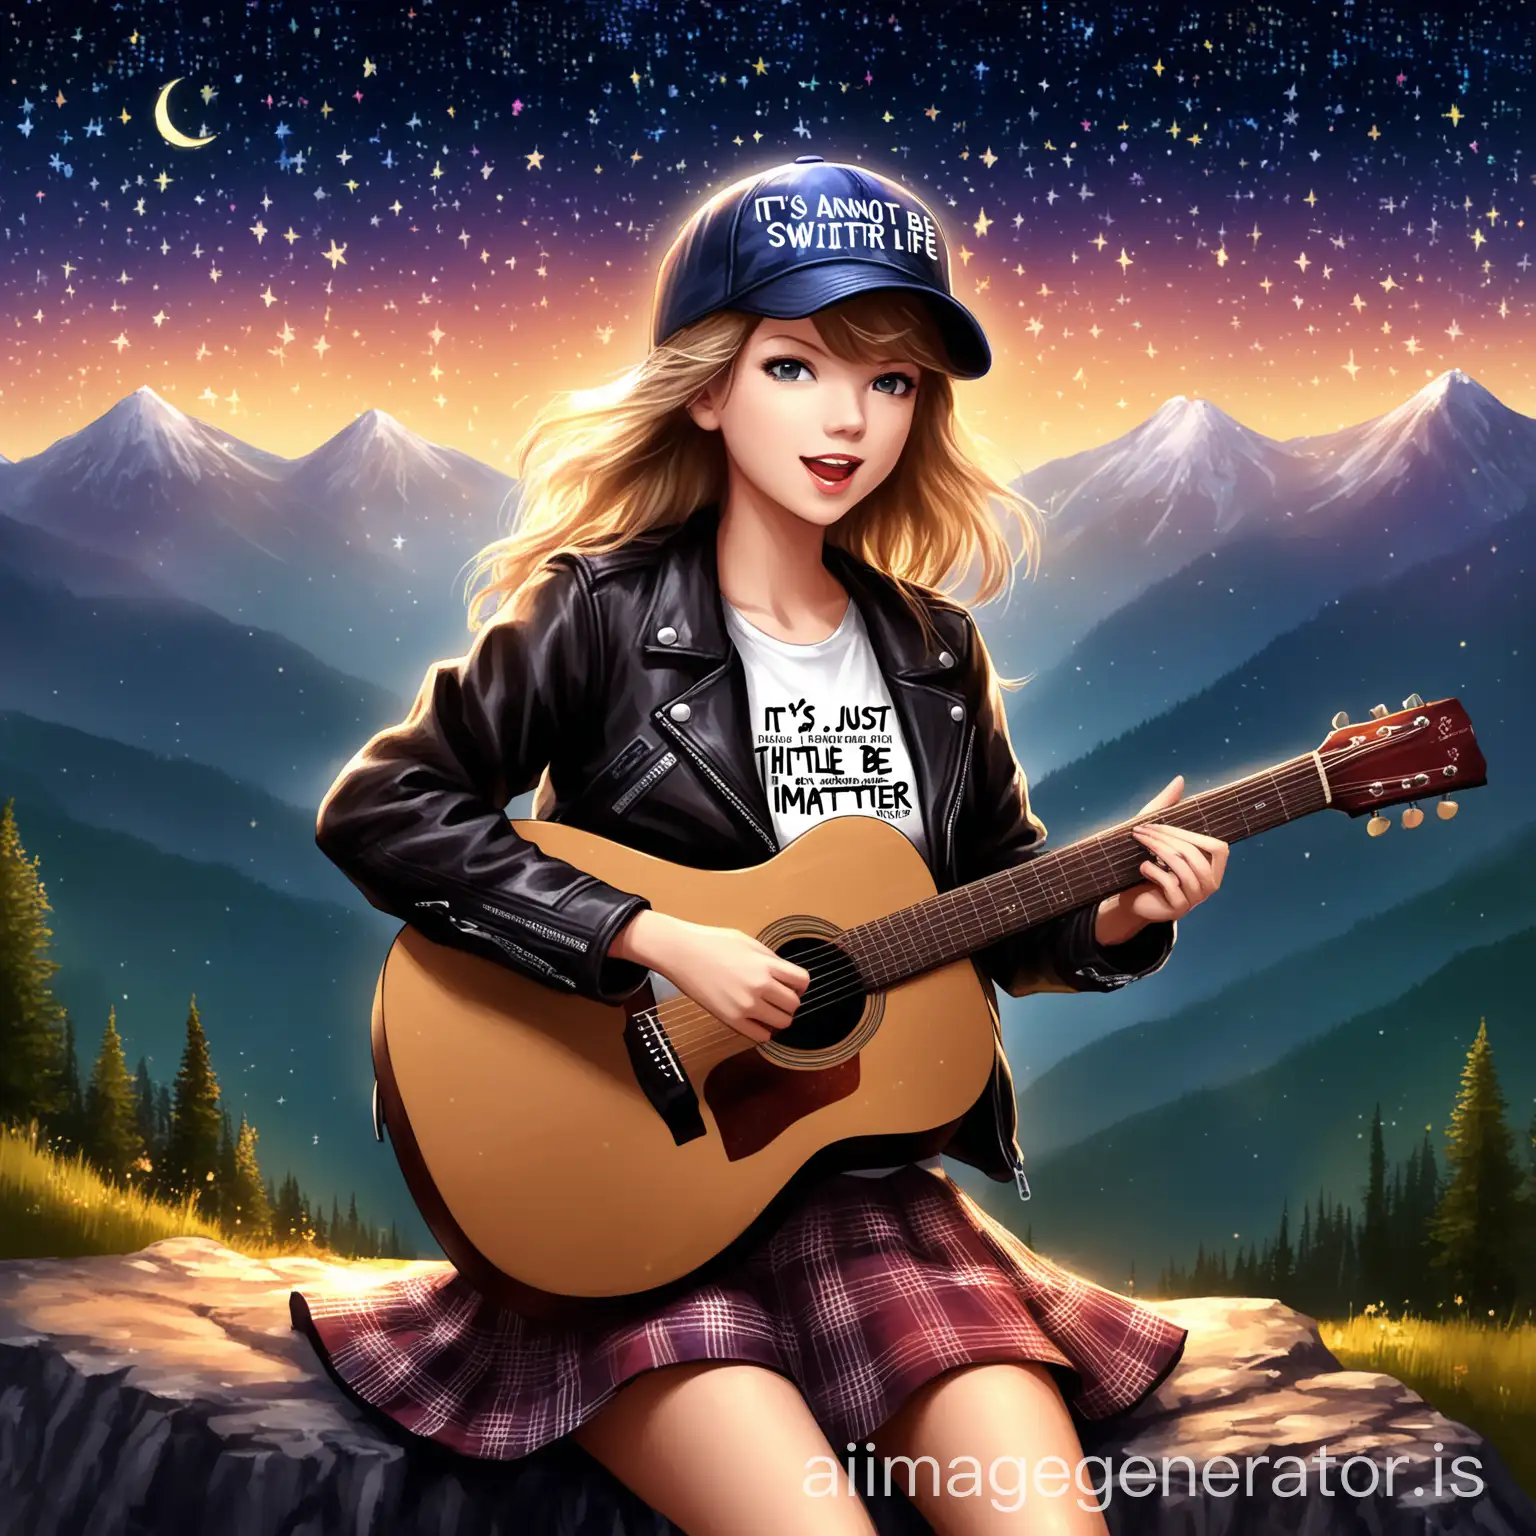 Futuristic-Young-Woman-Playing-Acoustic-Guitar-at-Music-Night